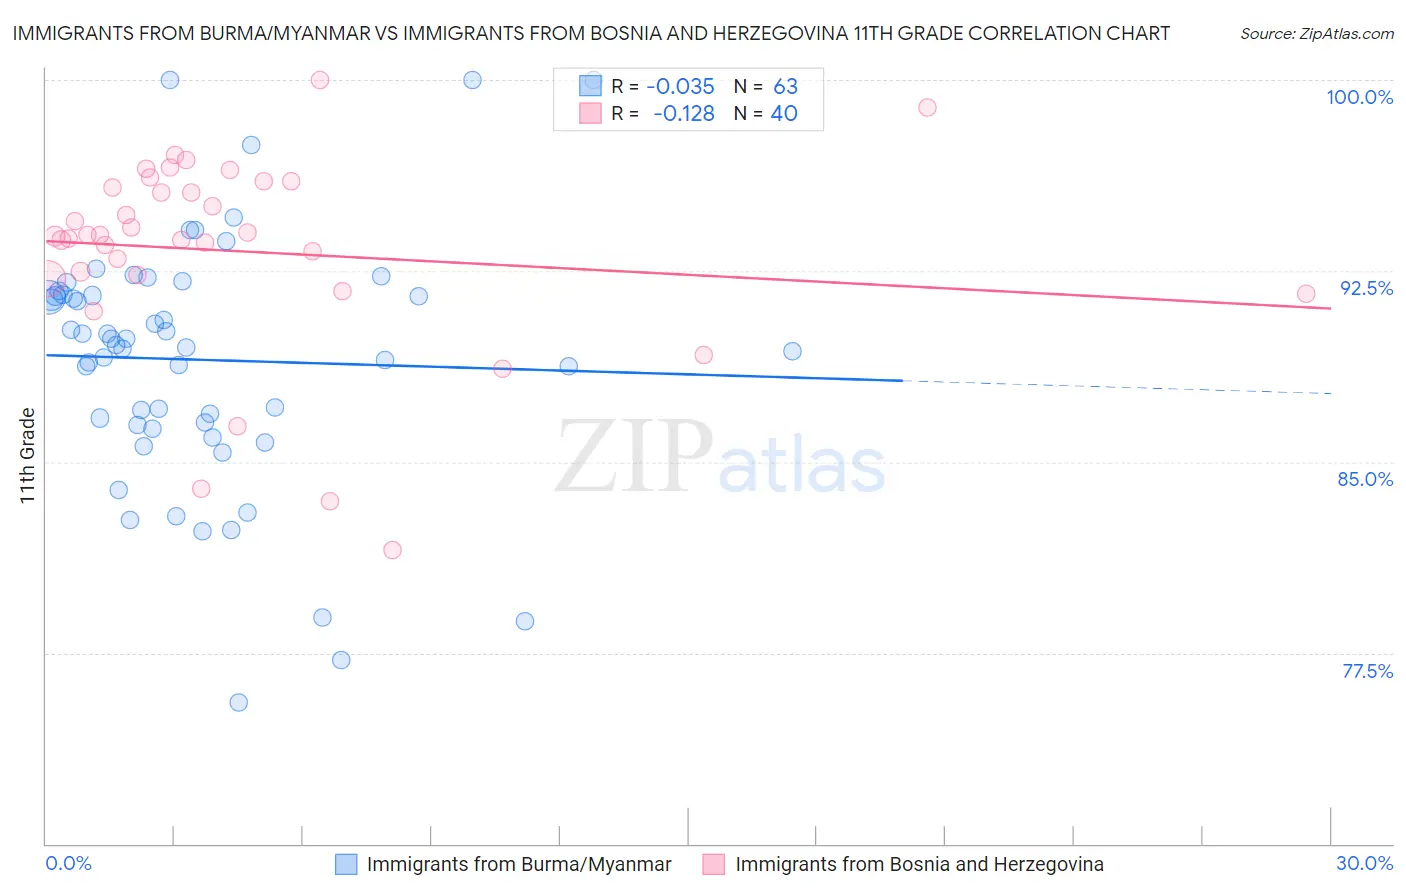 Immigrants from Burma/Myanmar vs Immigrants from Bosnia and Herzegovina 11th Grade